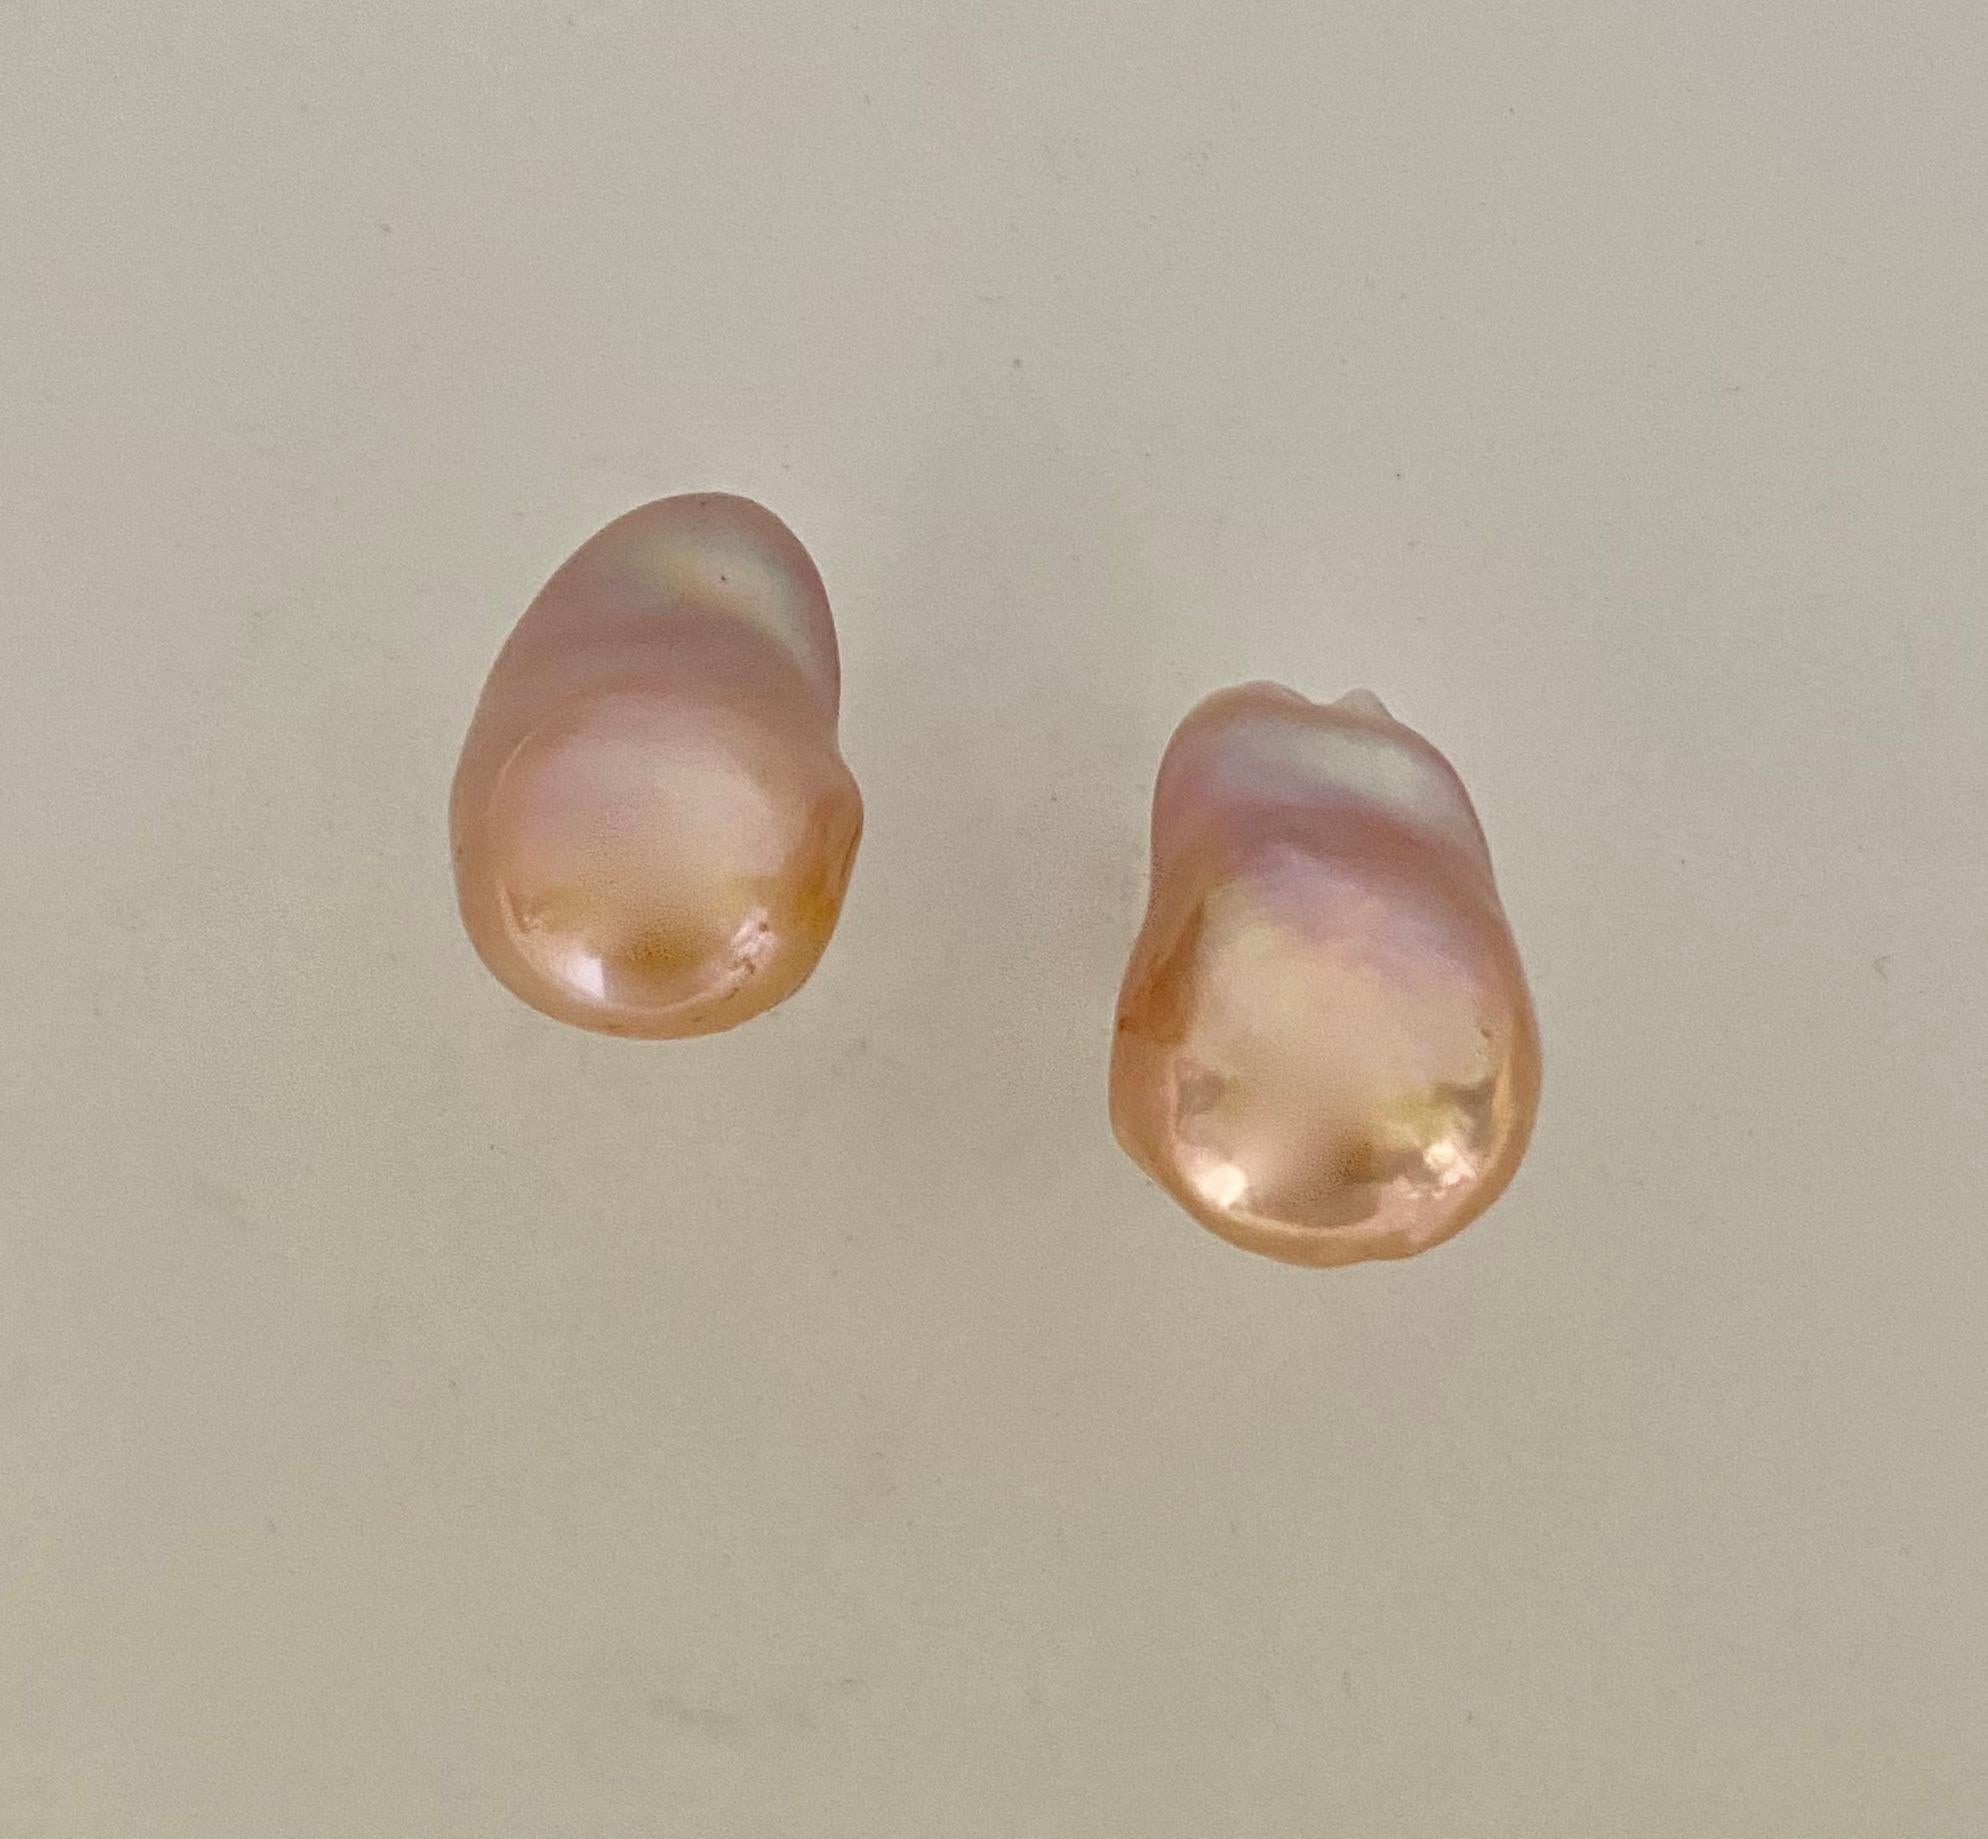 Baroque pearls are presented in these classic and elegant stud earrings.  The freshwater pearls (origin: China) are a luscious peachy/pink color.  They possess the rich luster freshwater pearls are renowned for having.  The baroque shape is called